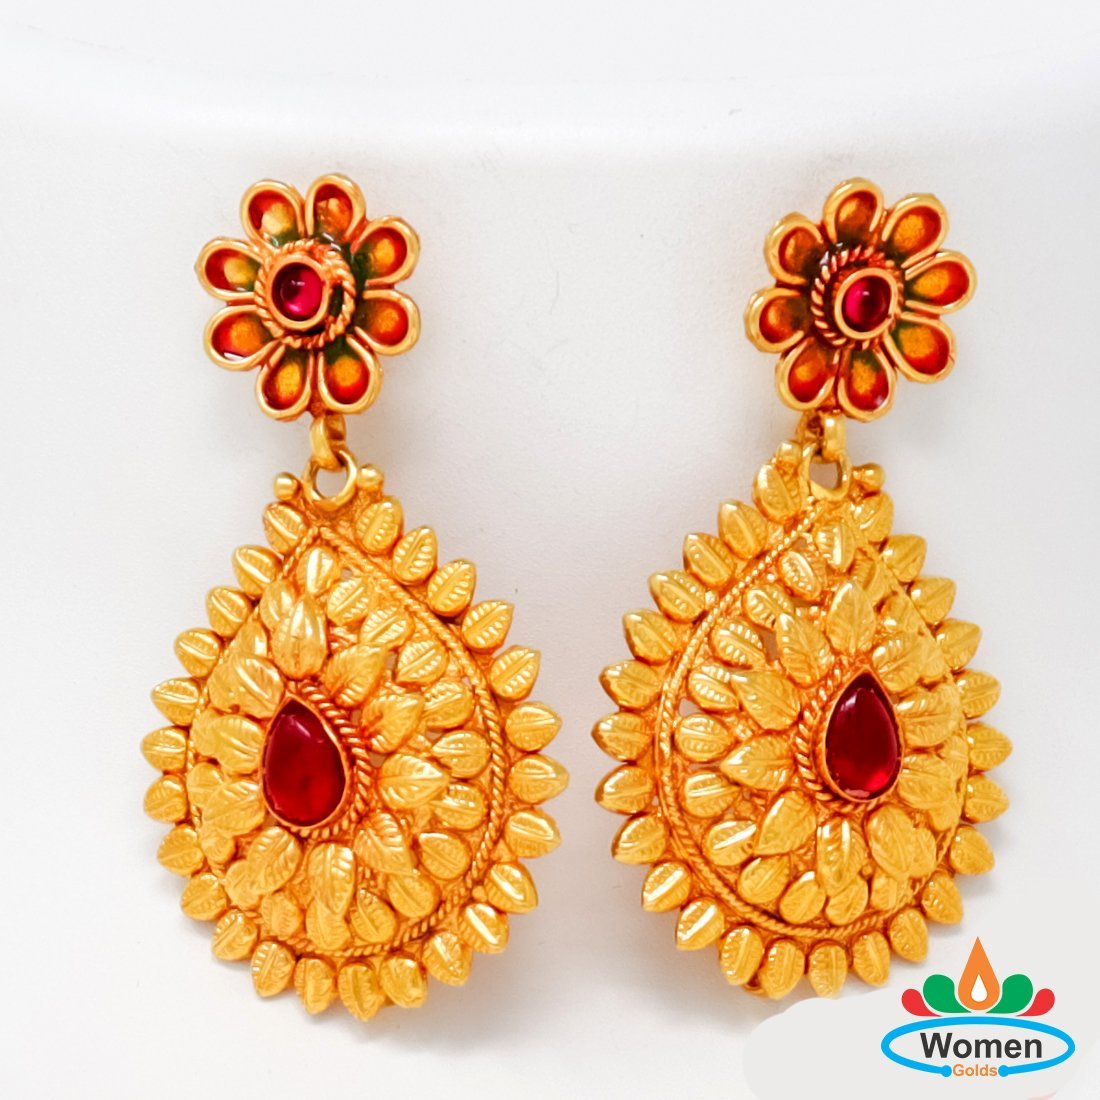 Gram Gold Jhumkas Only 1400 Rupees Jewellery Designs, 59% OFF